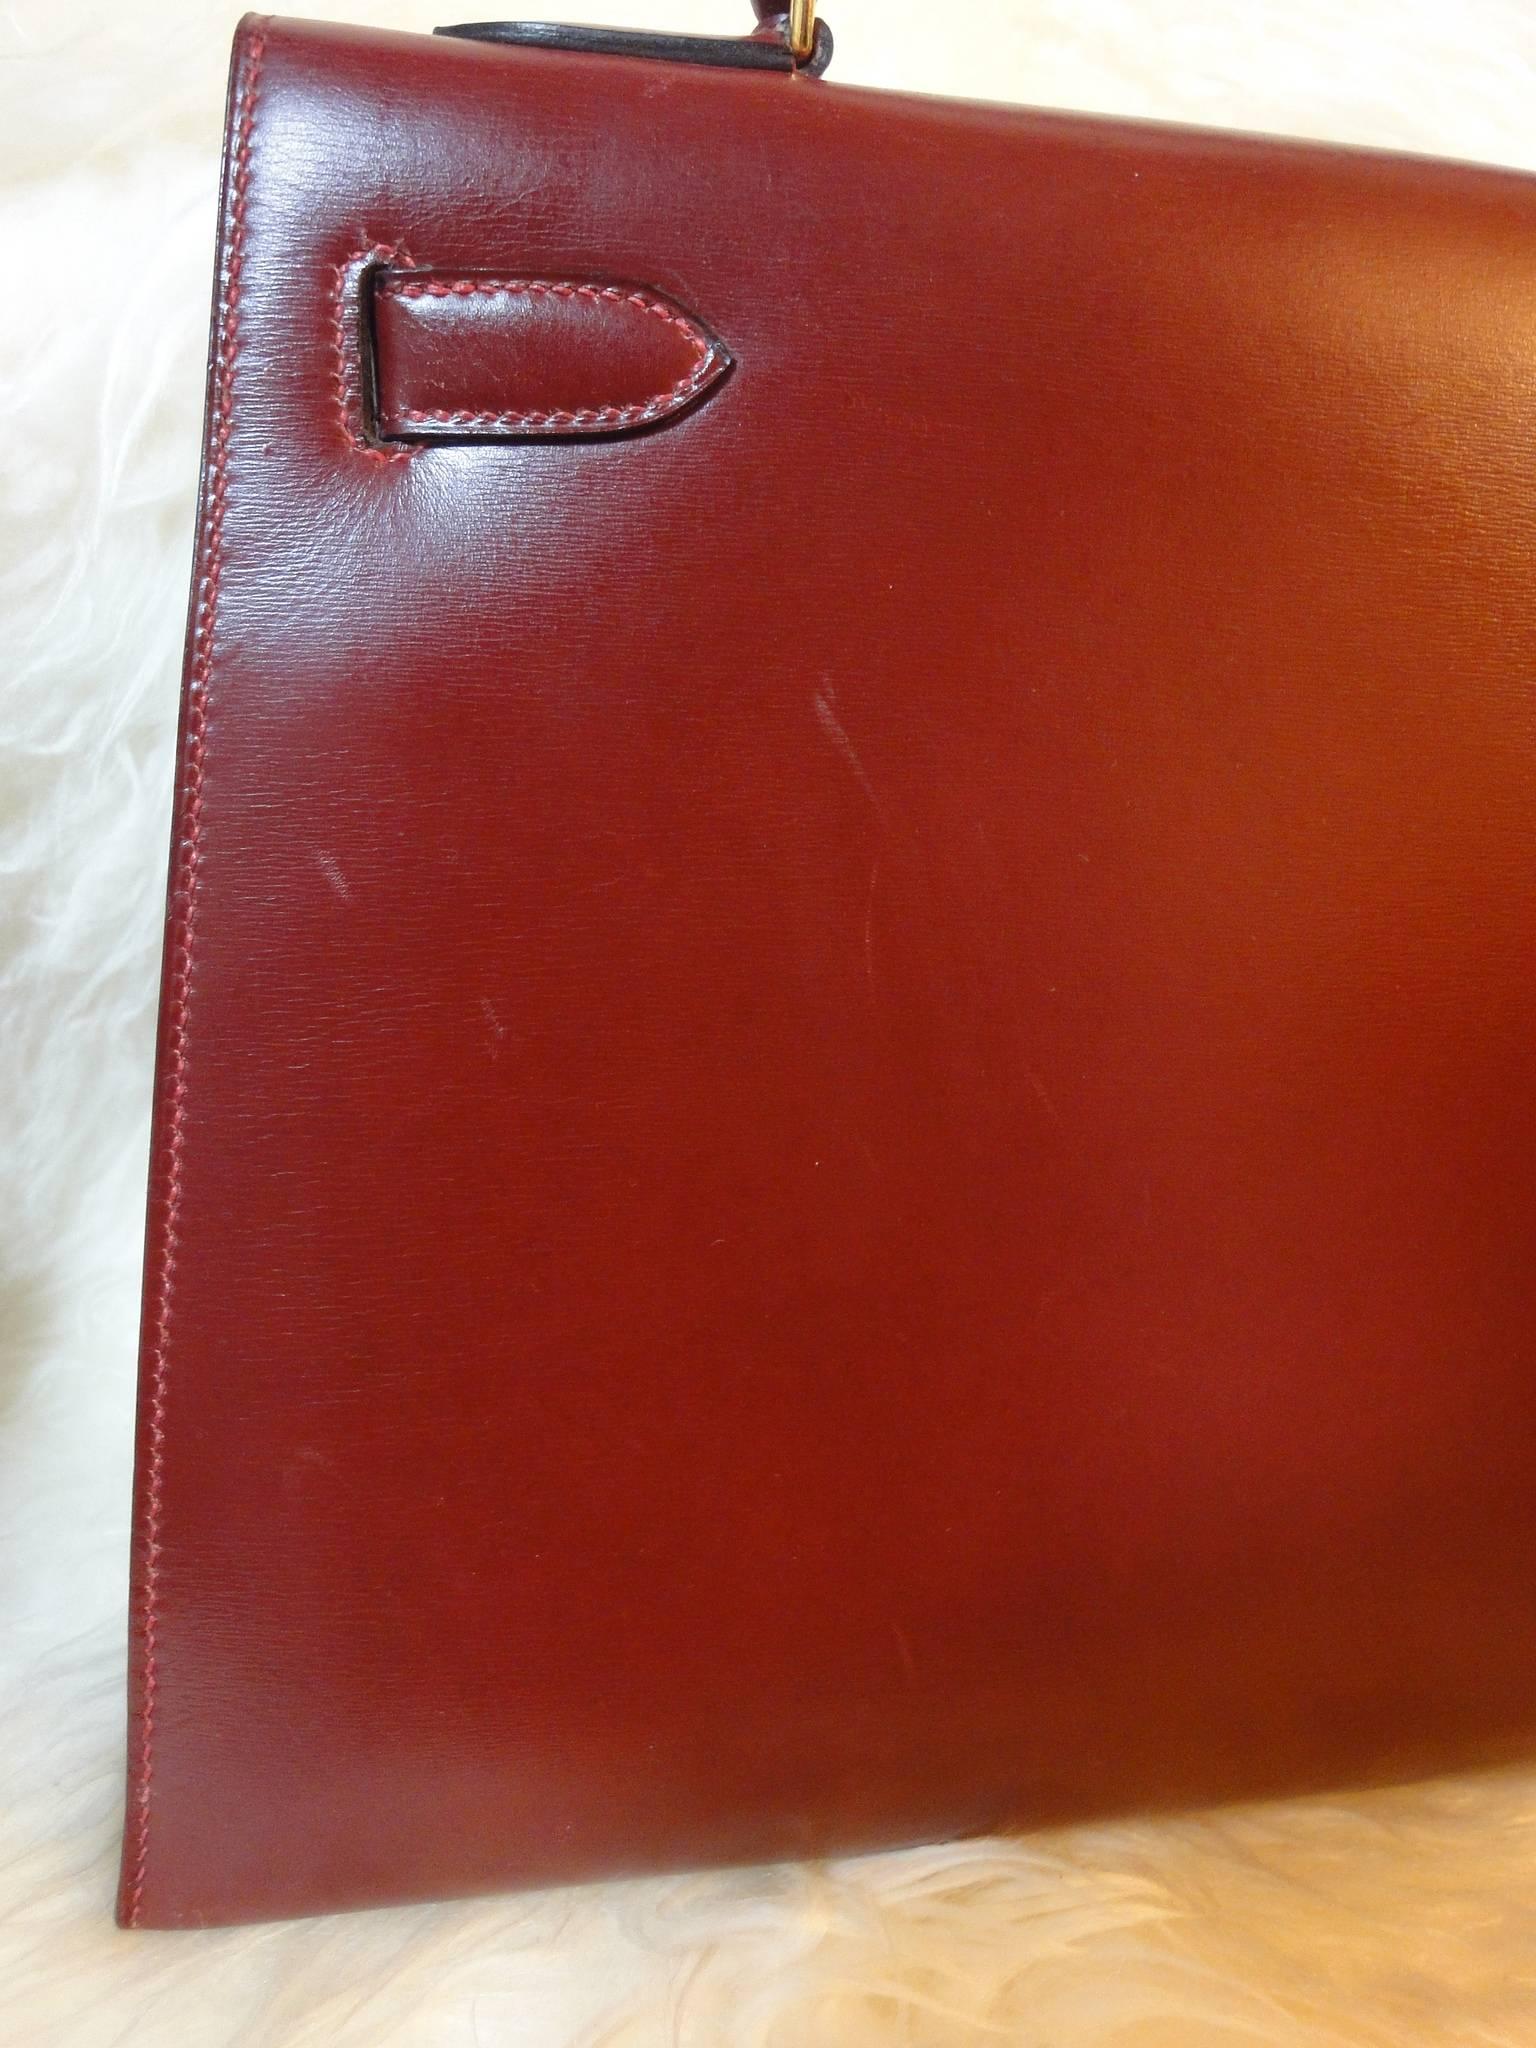 Women's 1980s Vintage HERMES Kelly 32 bag rouge ash box calf leather. Red, brown.